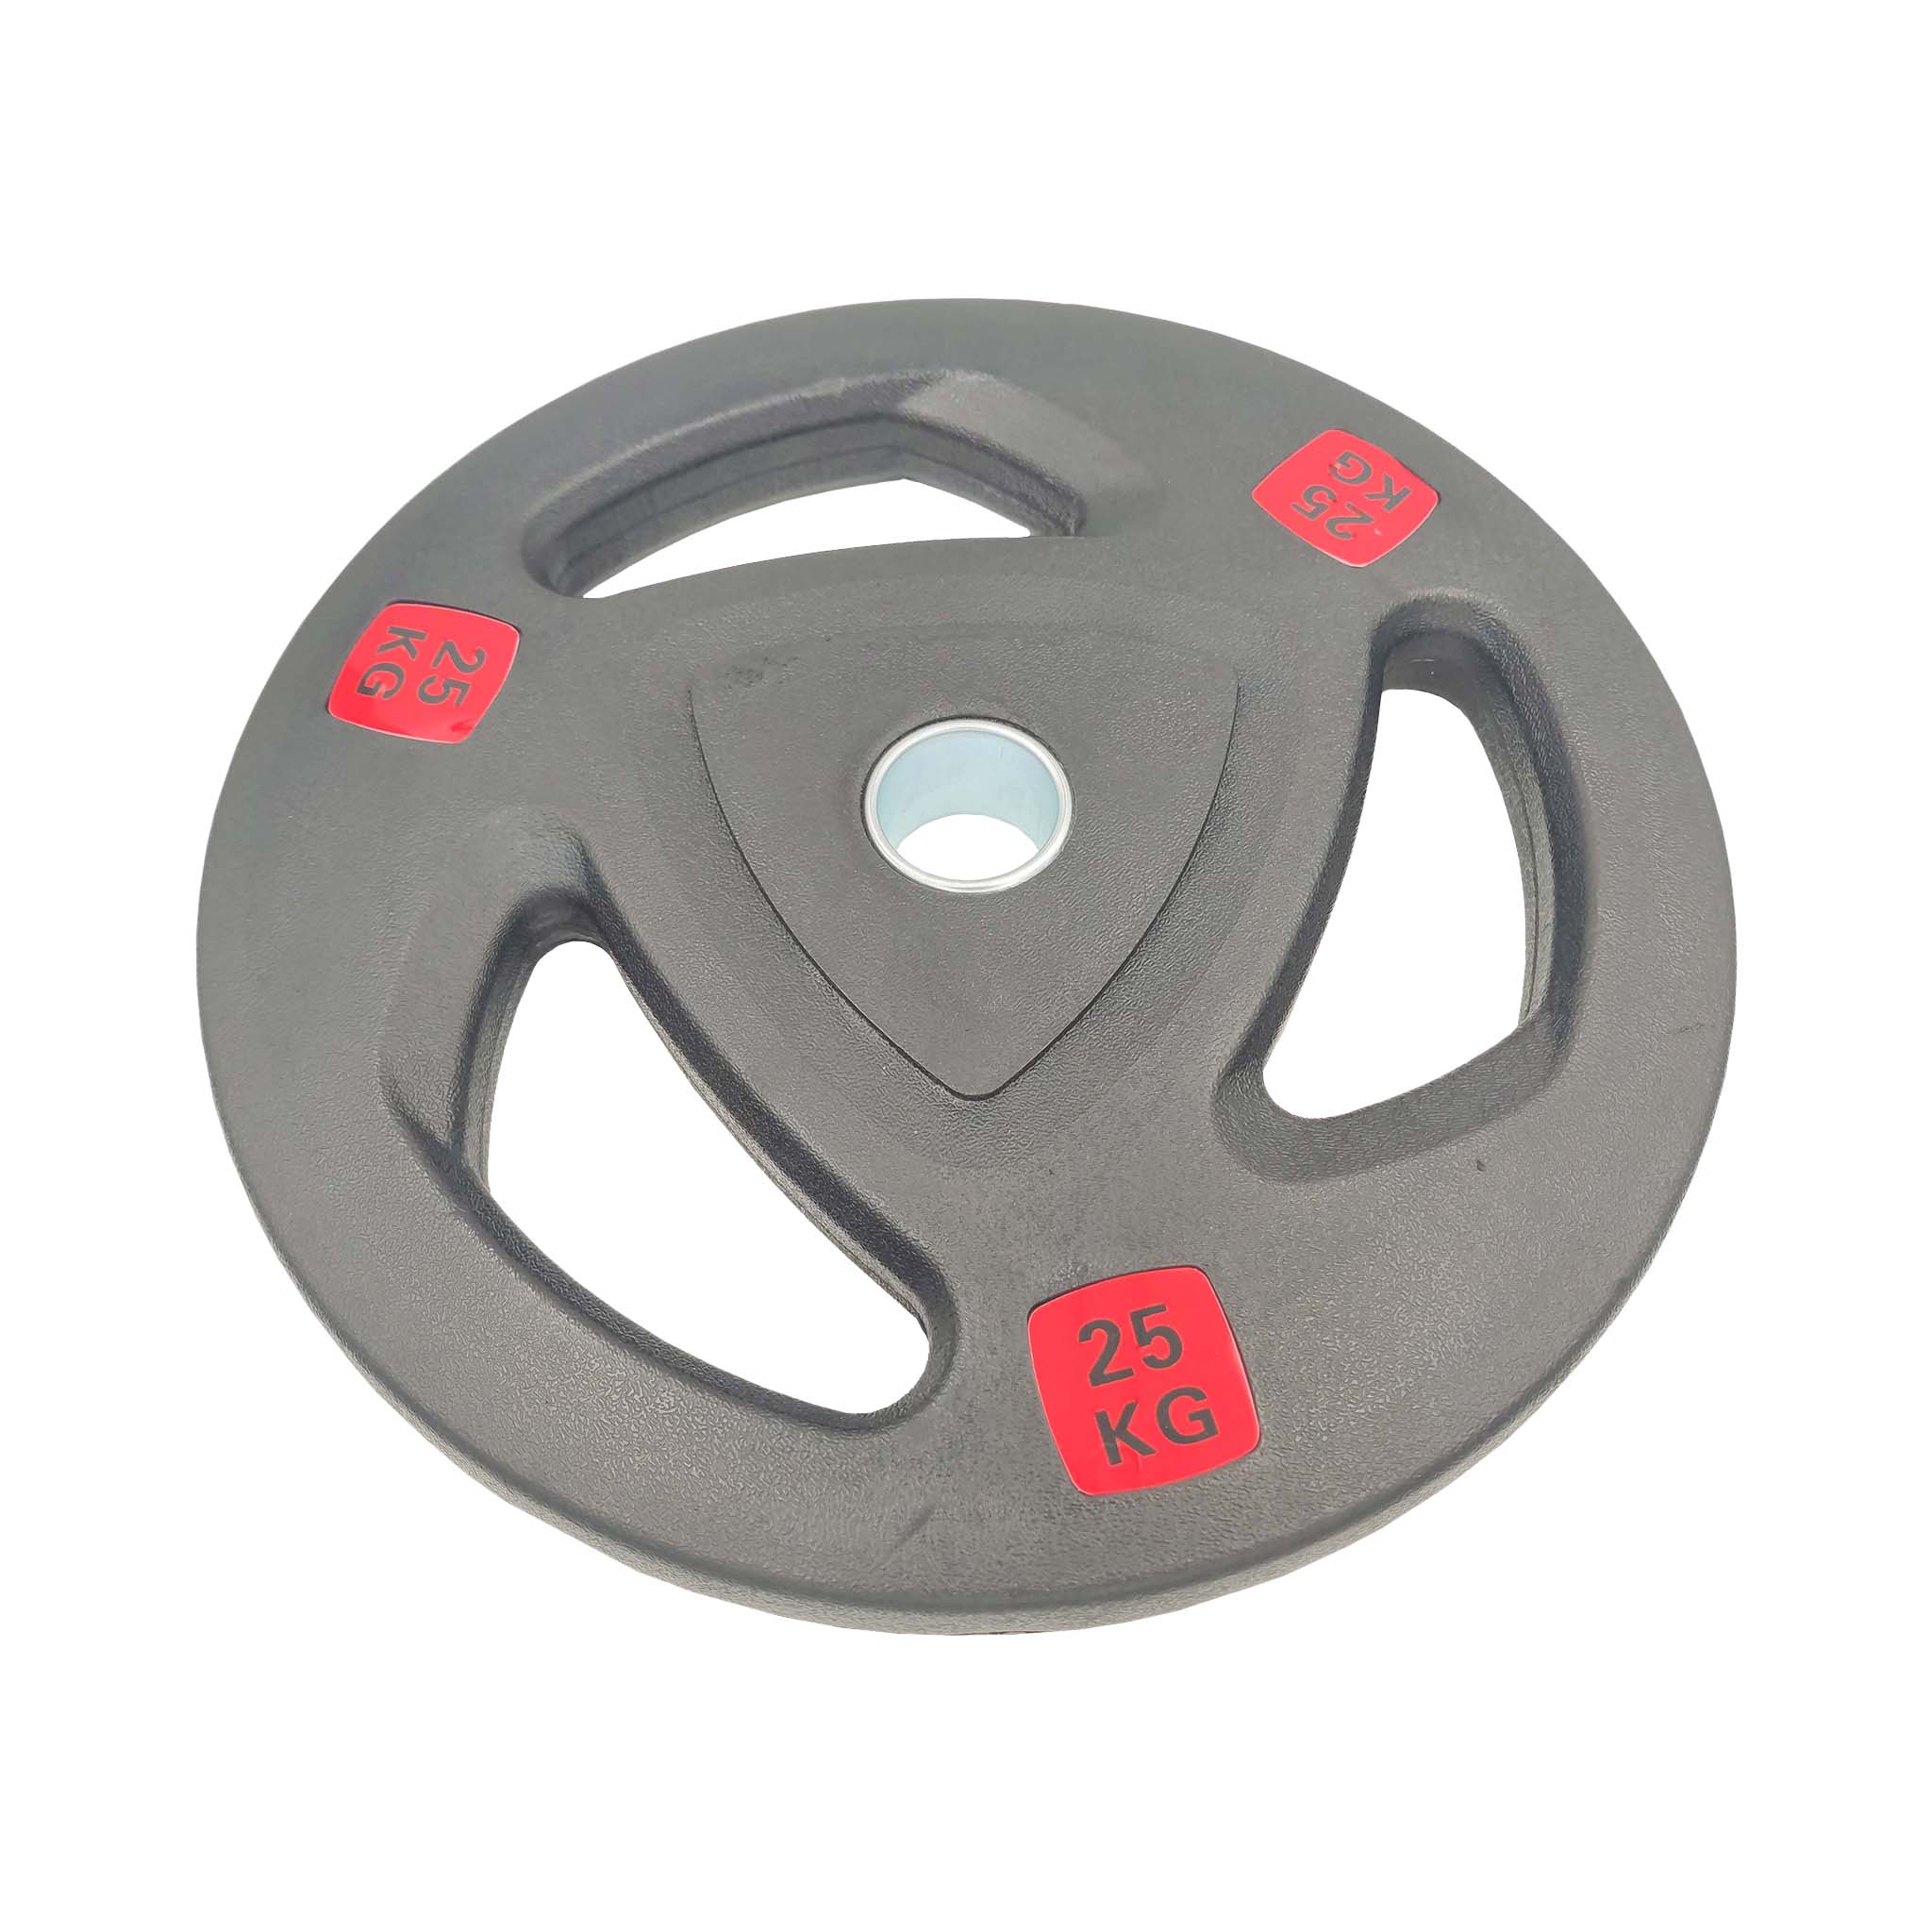 Rubber Coated Tri-grip Weight Plate Bundles 200kg/400kg | Tri Grip Rubber Plates | INSOURCE